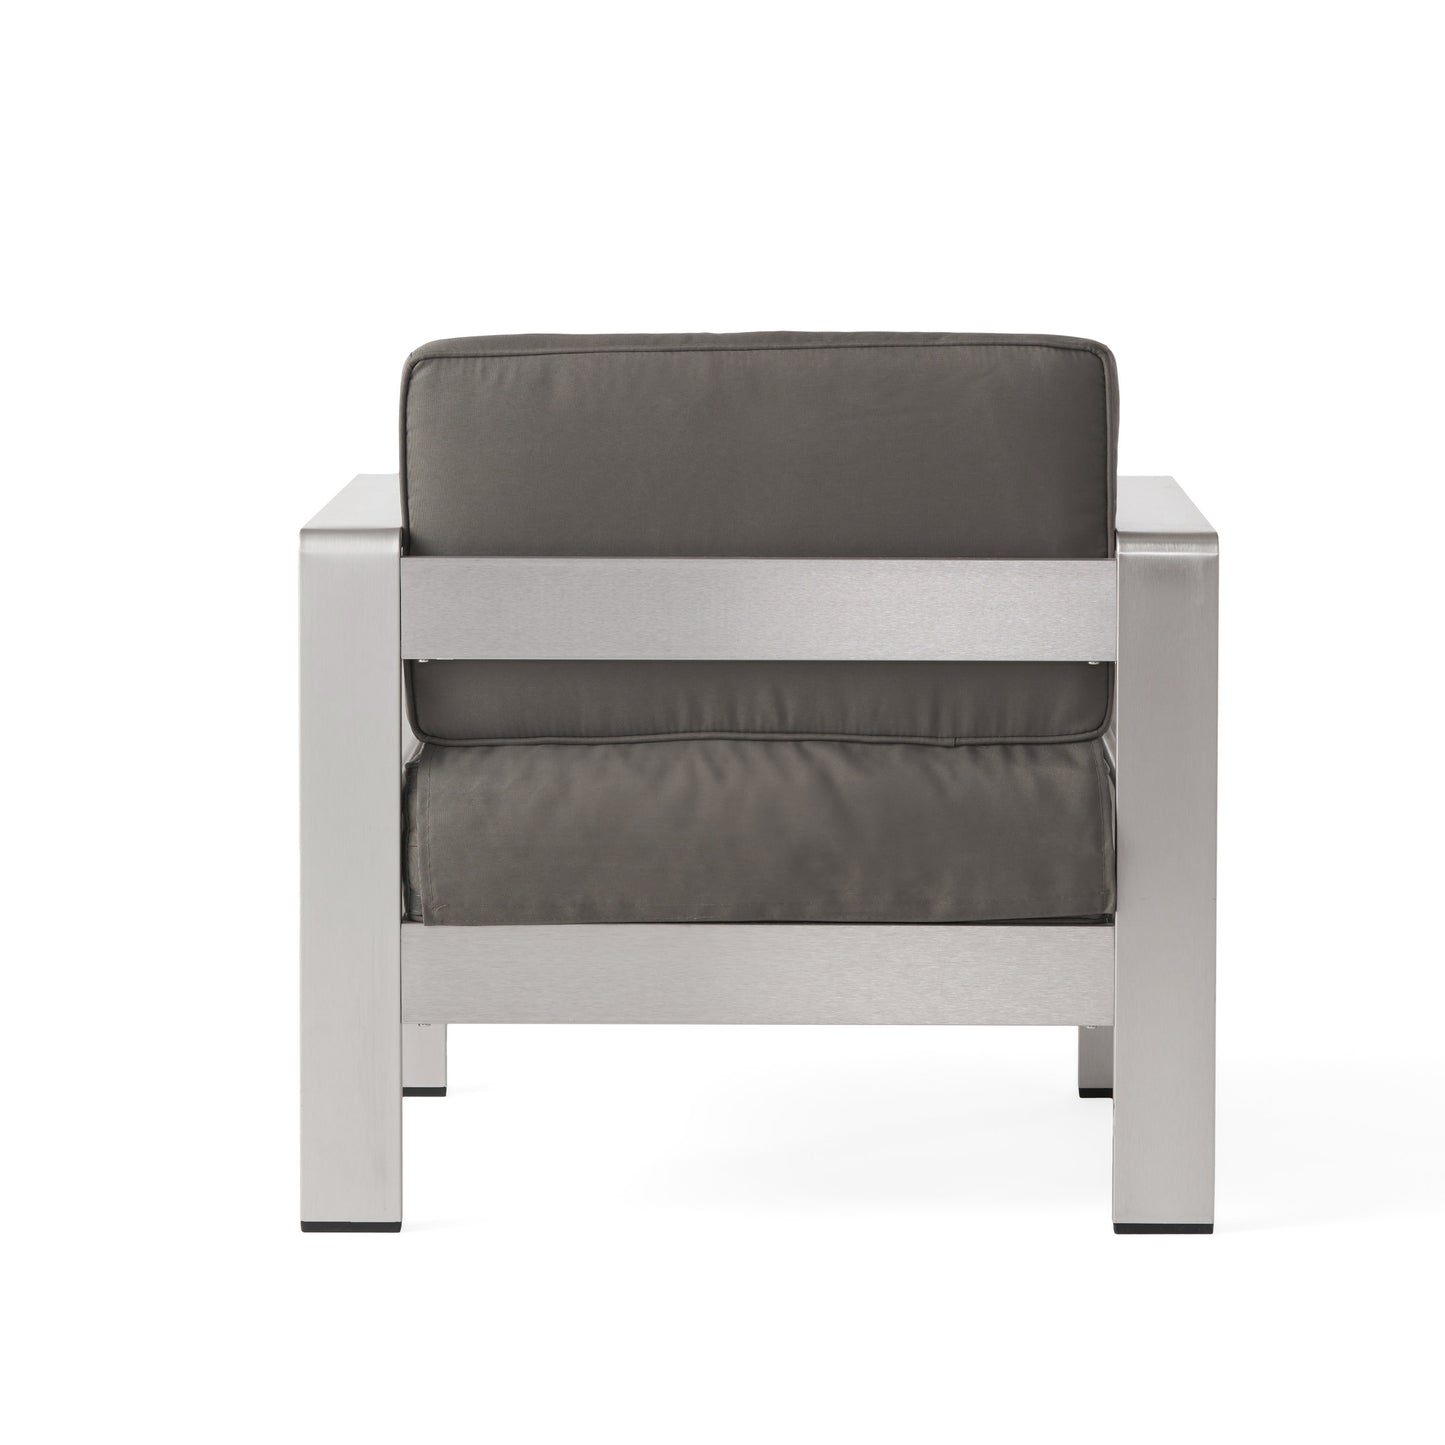 Emily Coral Outdoor Aluminum 2-Seater Club Chair Chat Set with Ottomans and Side Table